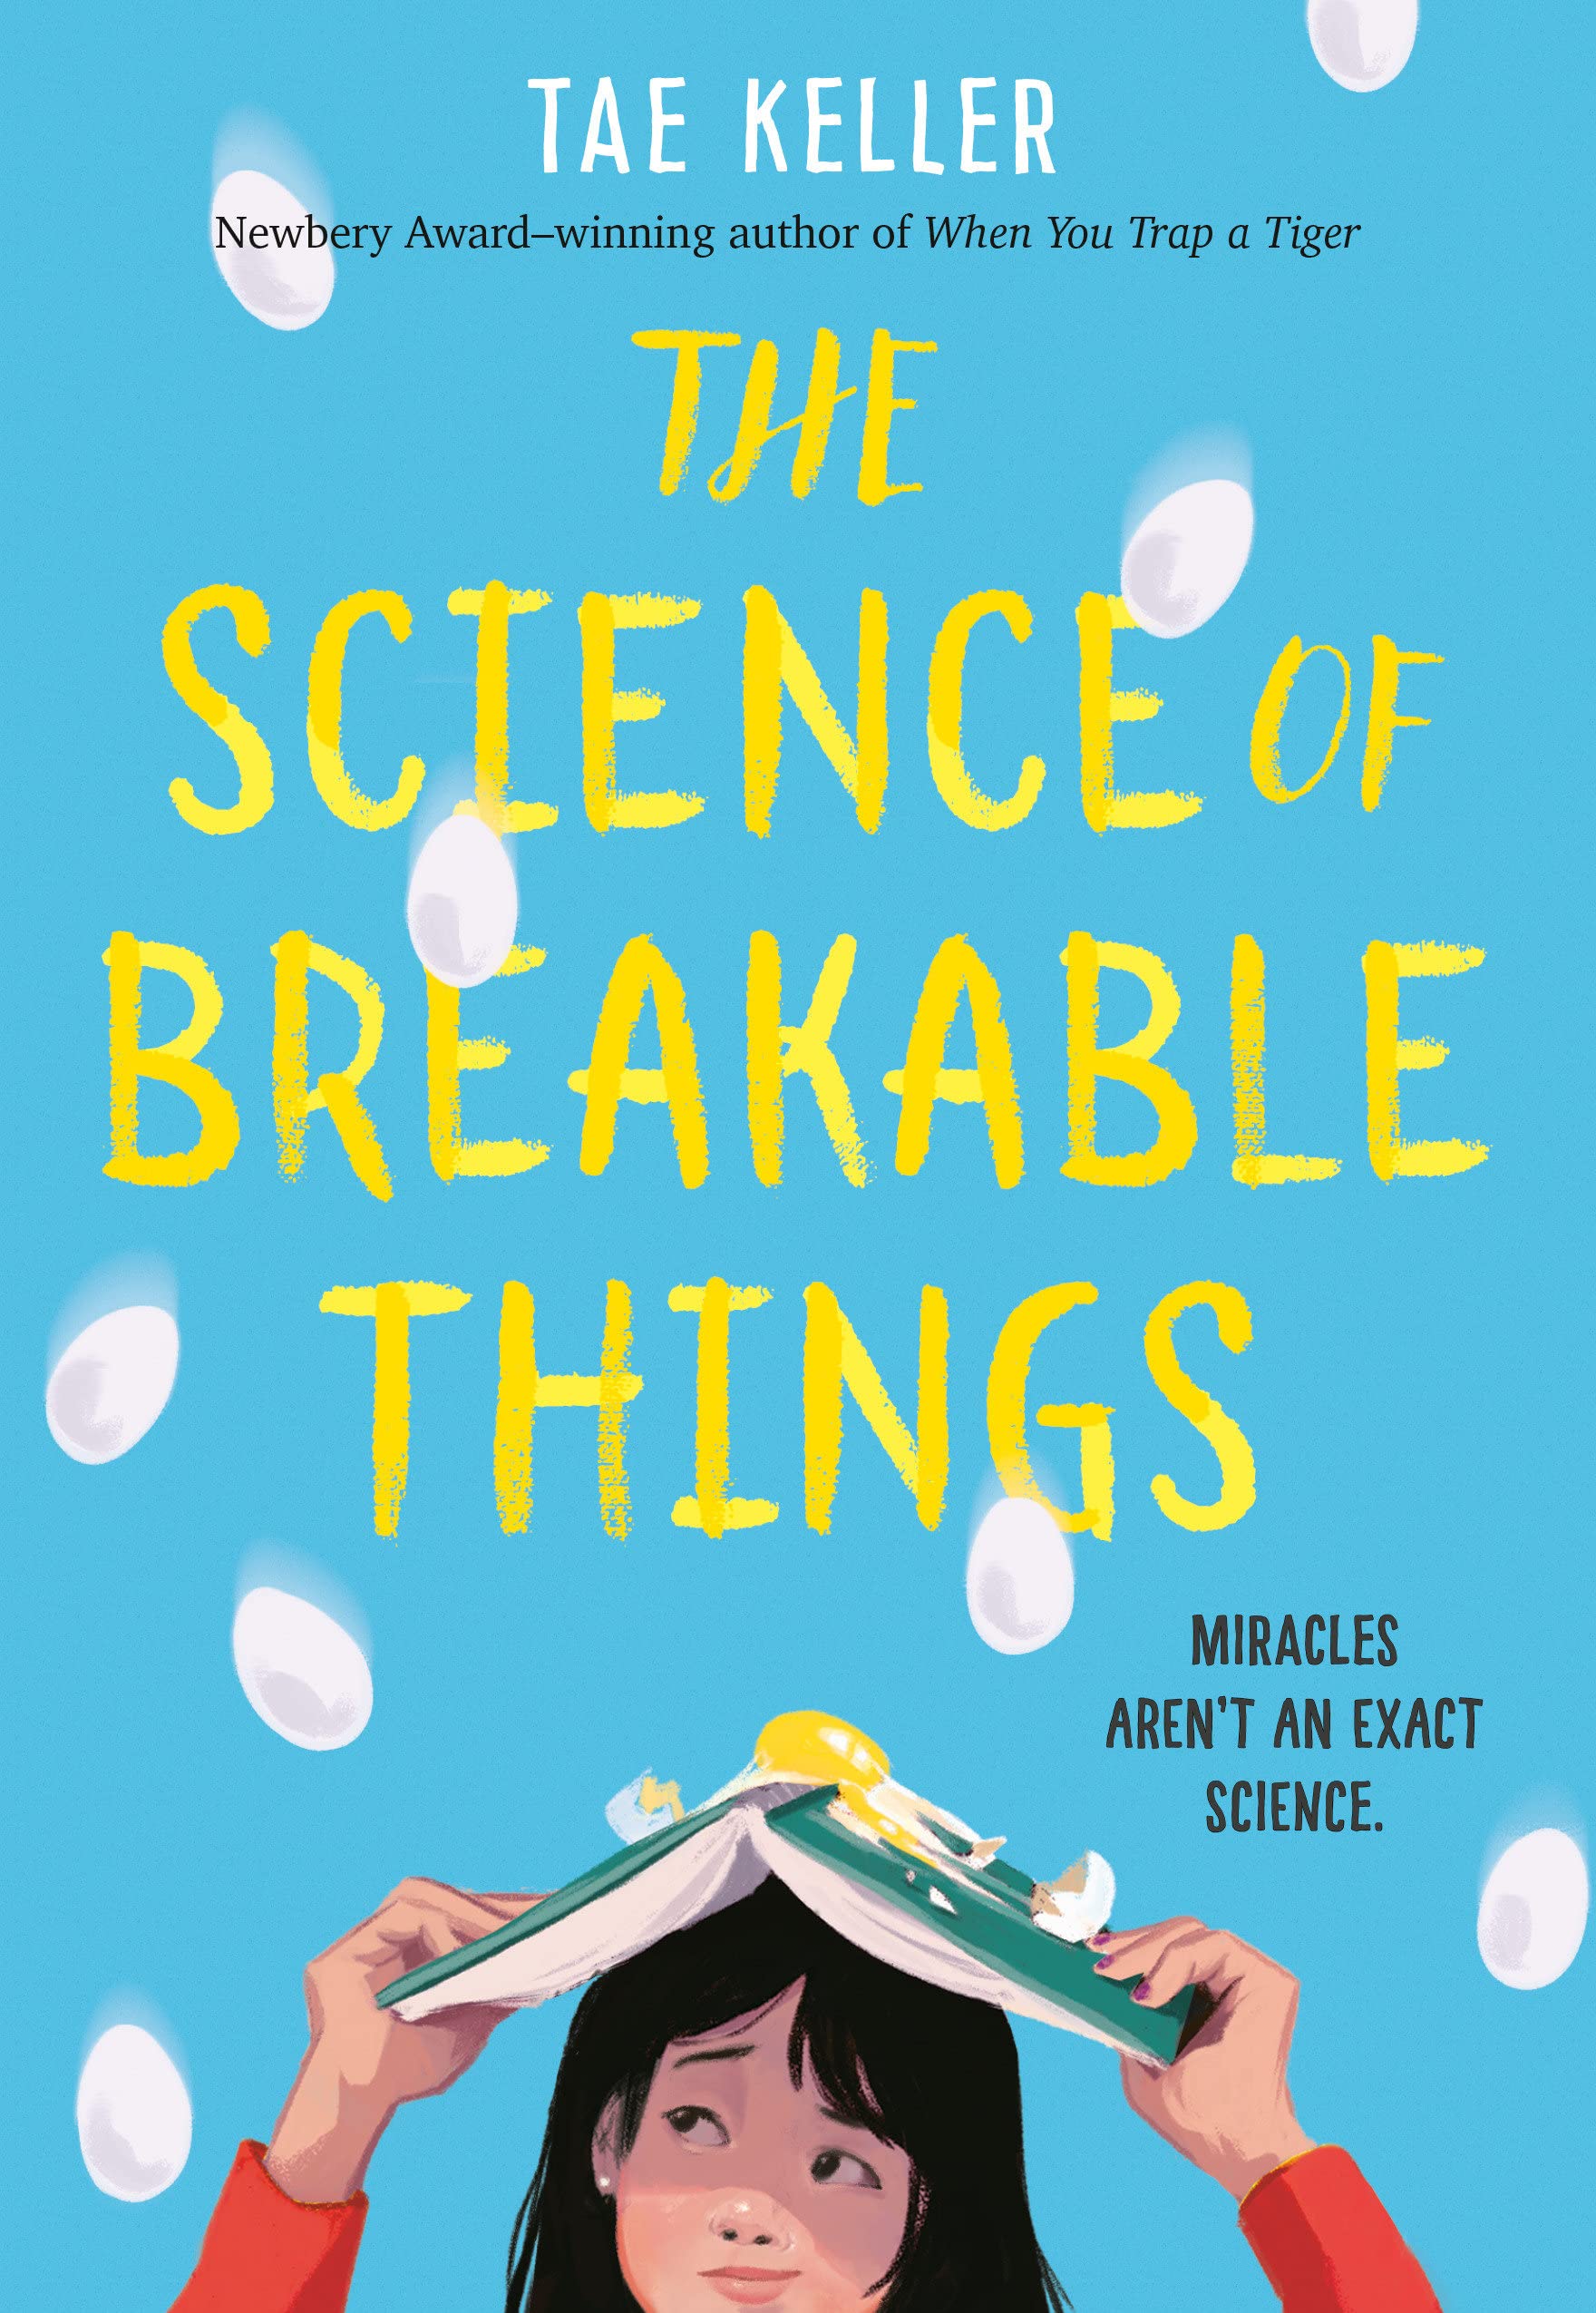 Image for "The Science of Breakable Things"